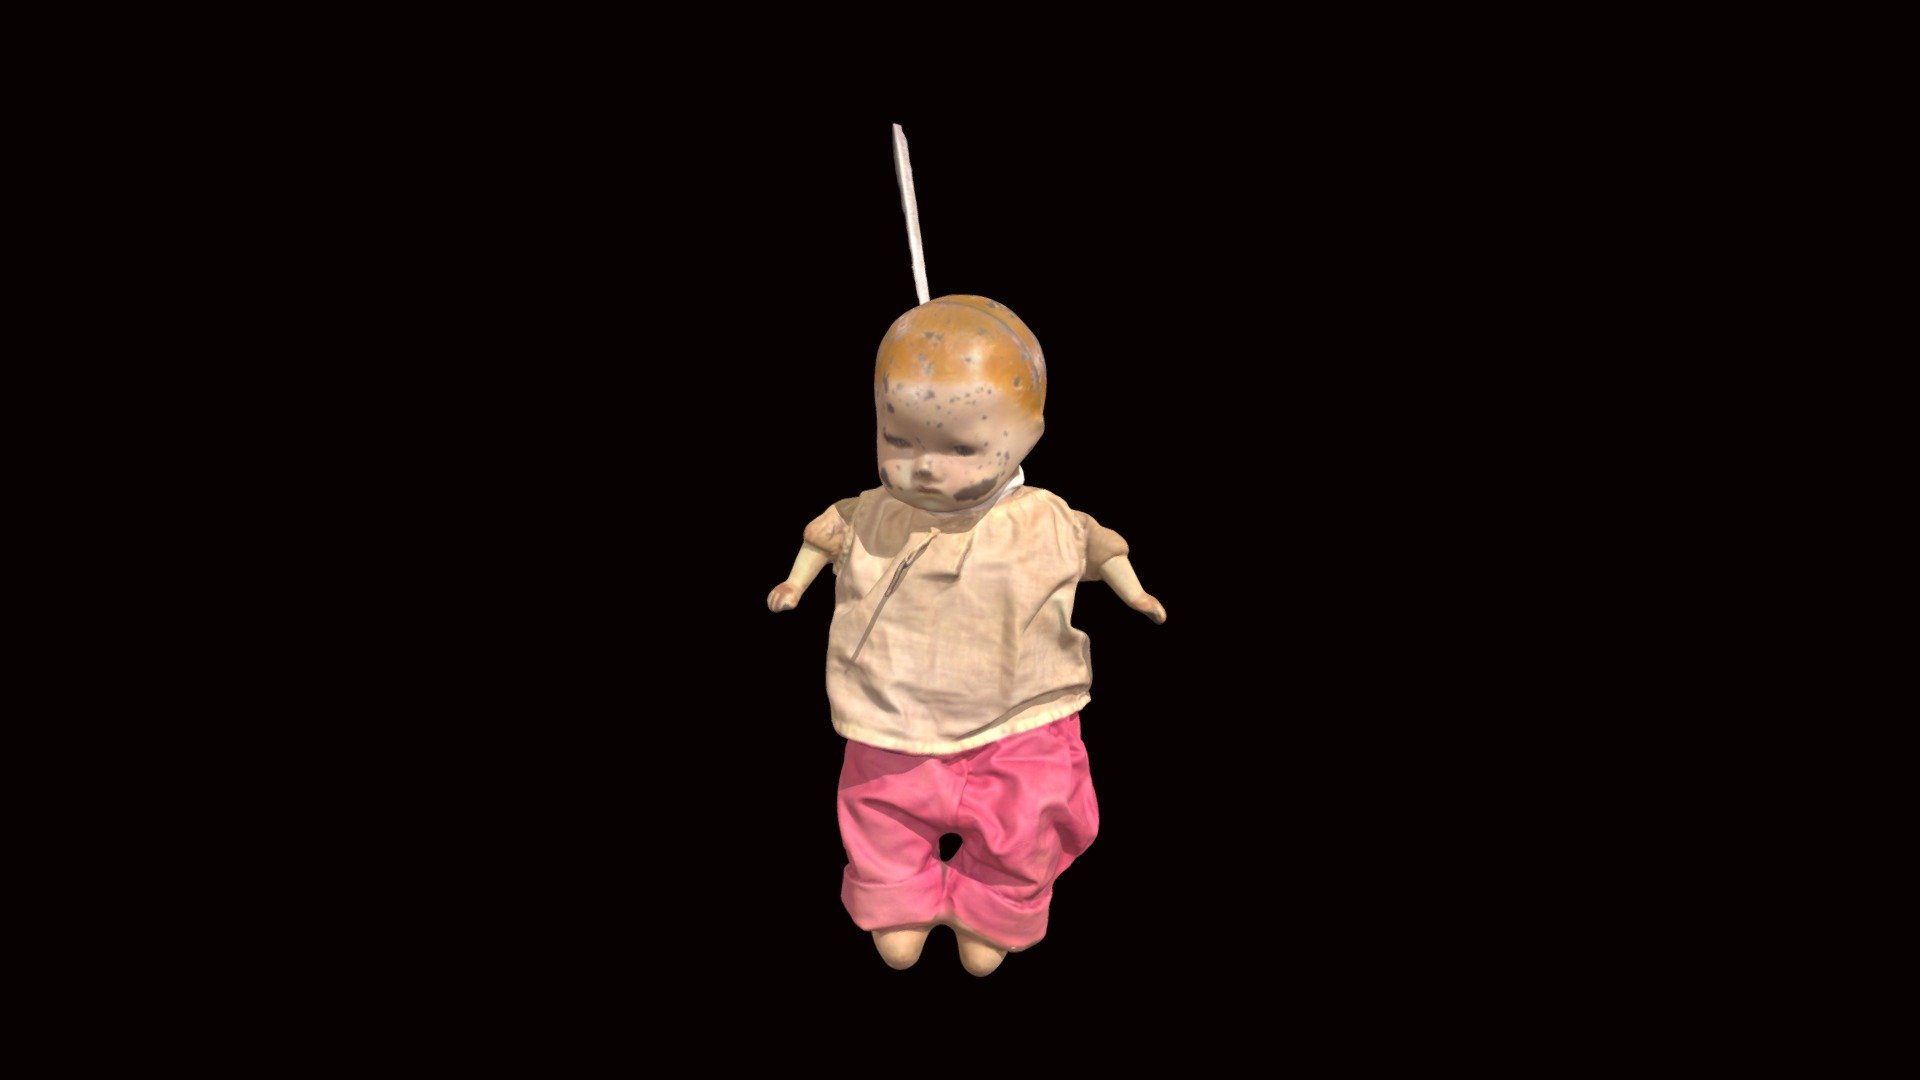 The flexible nature of this doll's body meant that it had to be suspended by its neck to allow as complete a scan as possible. The doll was suspended with its feet touch a surface so the doll did not sway. It was 3-D scanned with an Einstar 3-D scanner on 19 February 2024. The doll was provided for 3-D scanning by Heather Ludeke 3d model